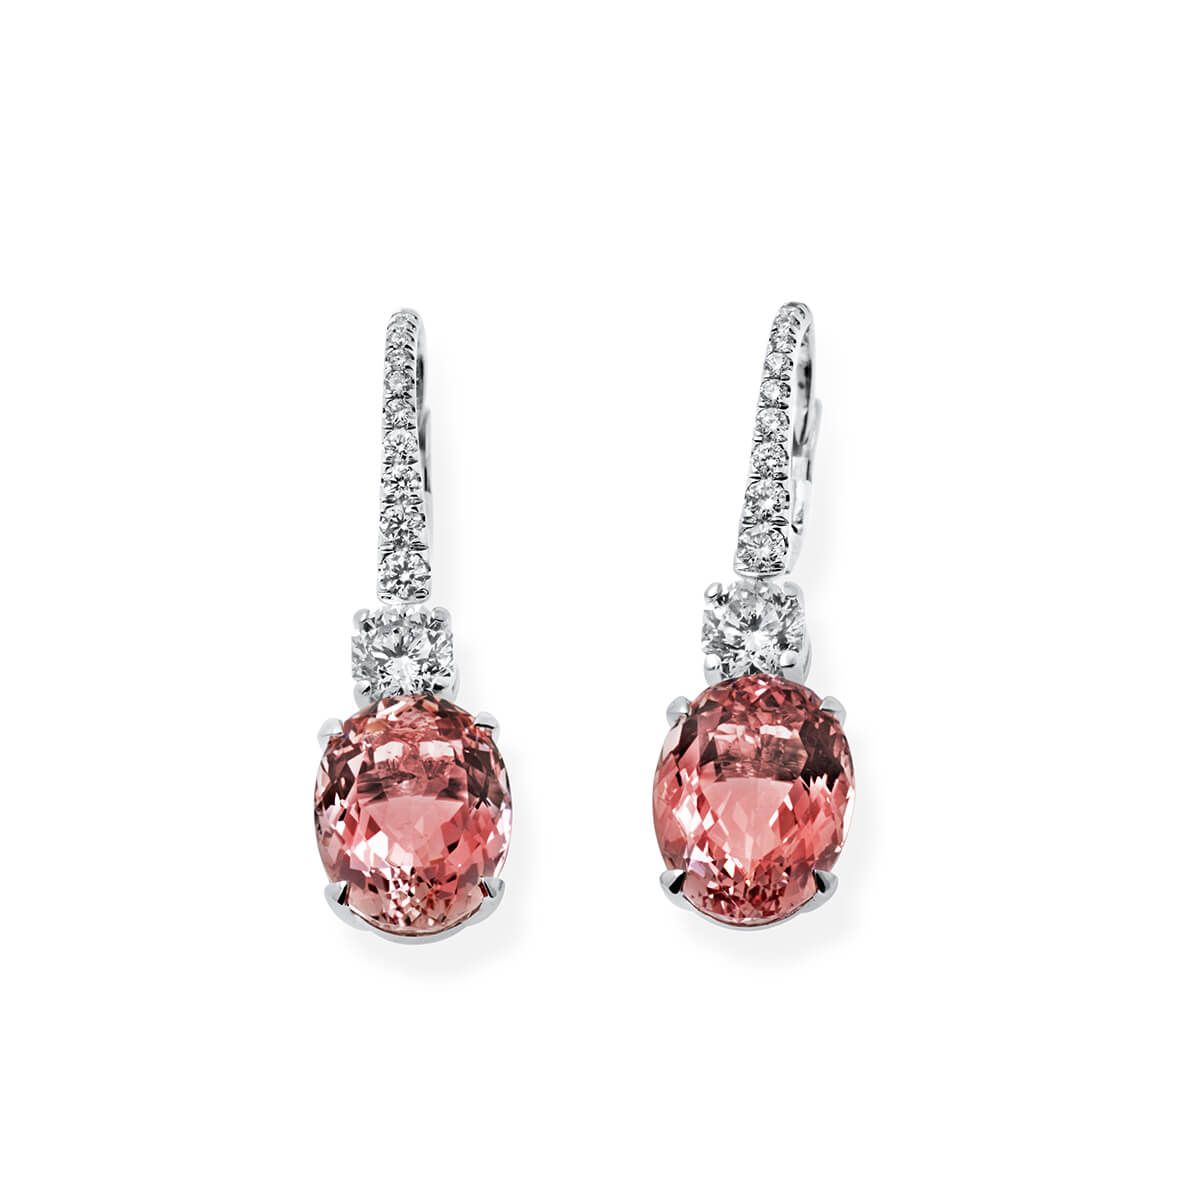 Natural Pink Morganite Earrings, 11.09 Ct. (11.47 Ct. TW), IGL Certified, J37924883IL, Unheated